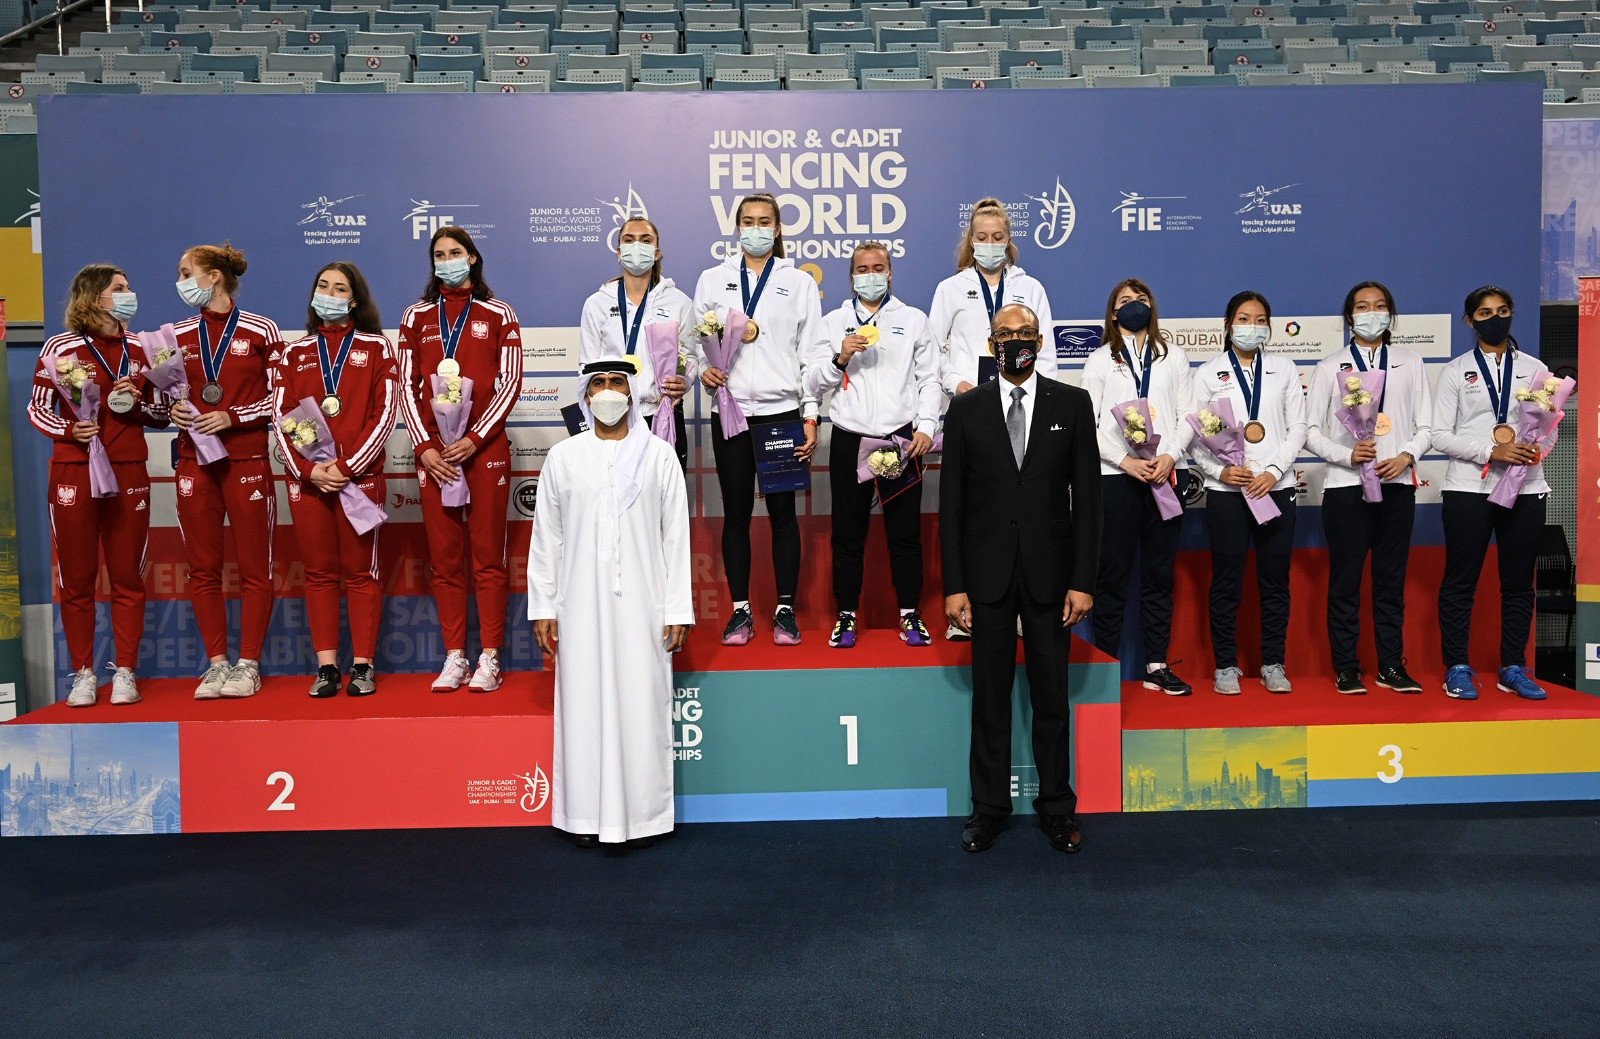 Israel and Egypt win épée titles on last day of Junior and Cadet Fencing World Championships